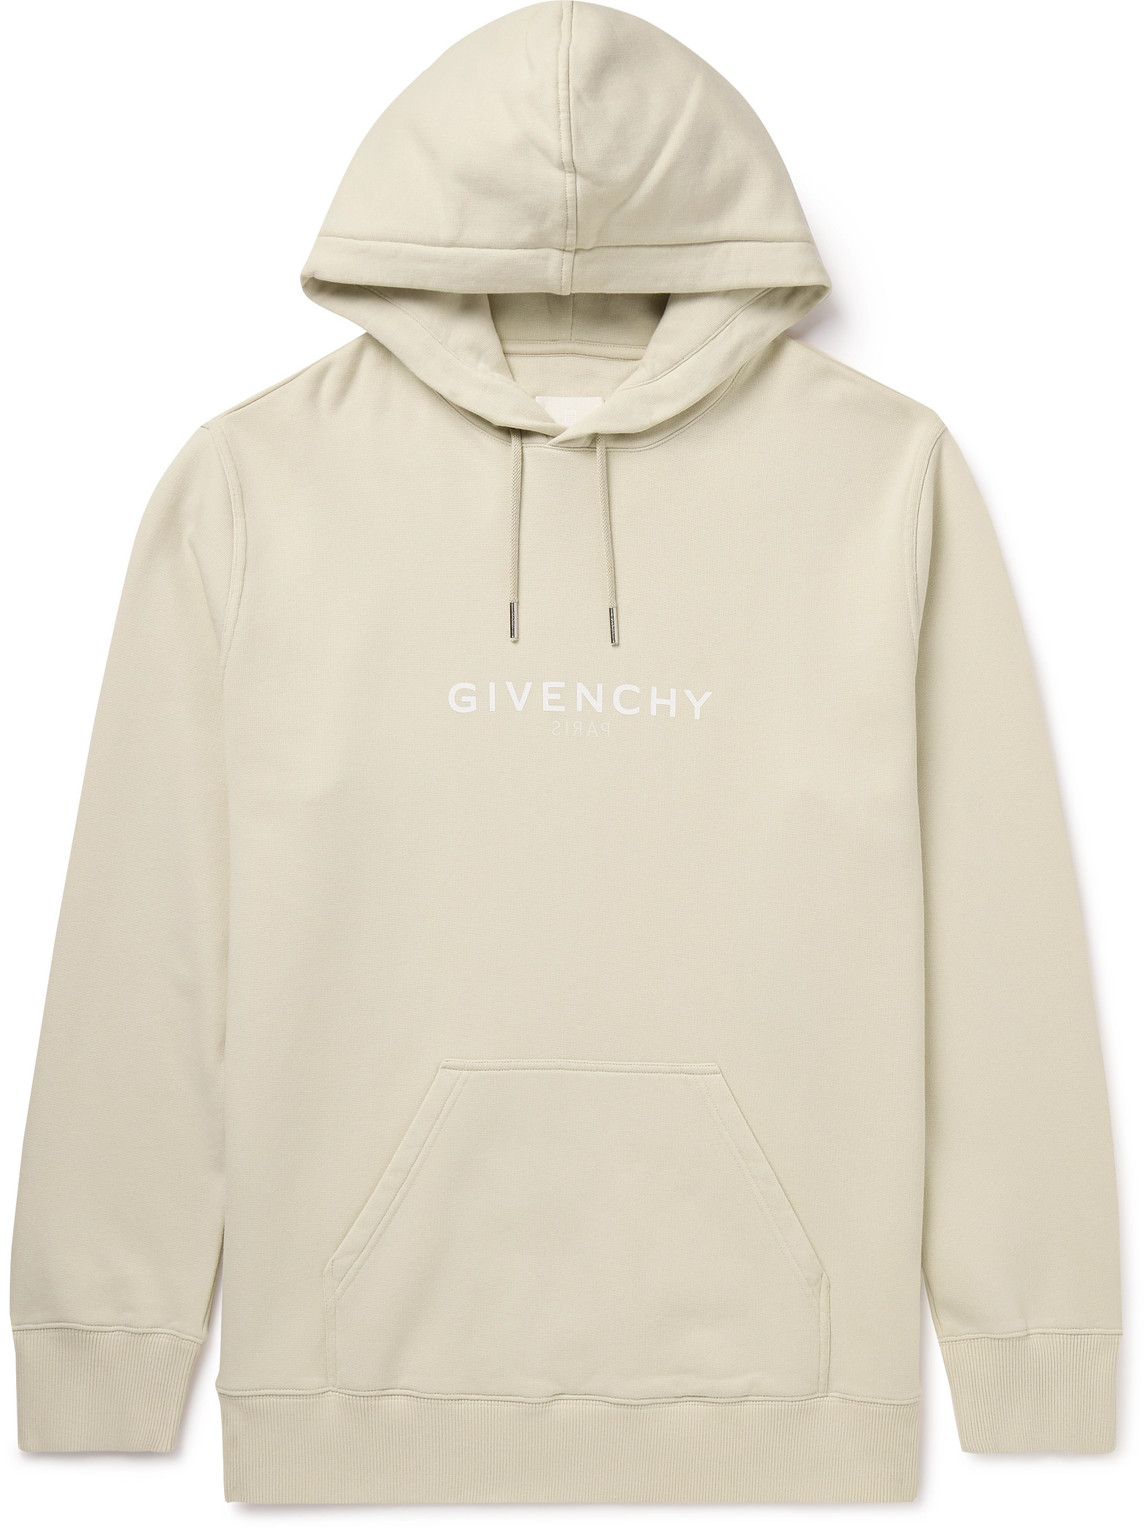 GIVENCHY LOGO-PRINT COTTON-JERSEY HOODIE